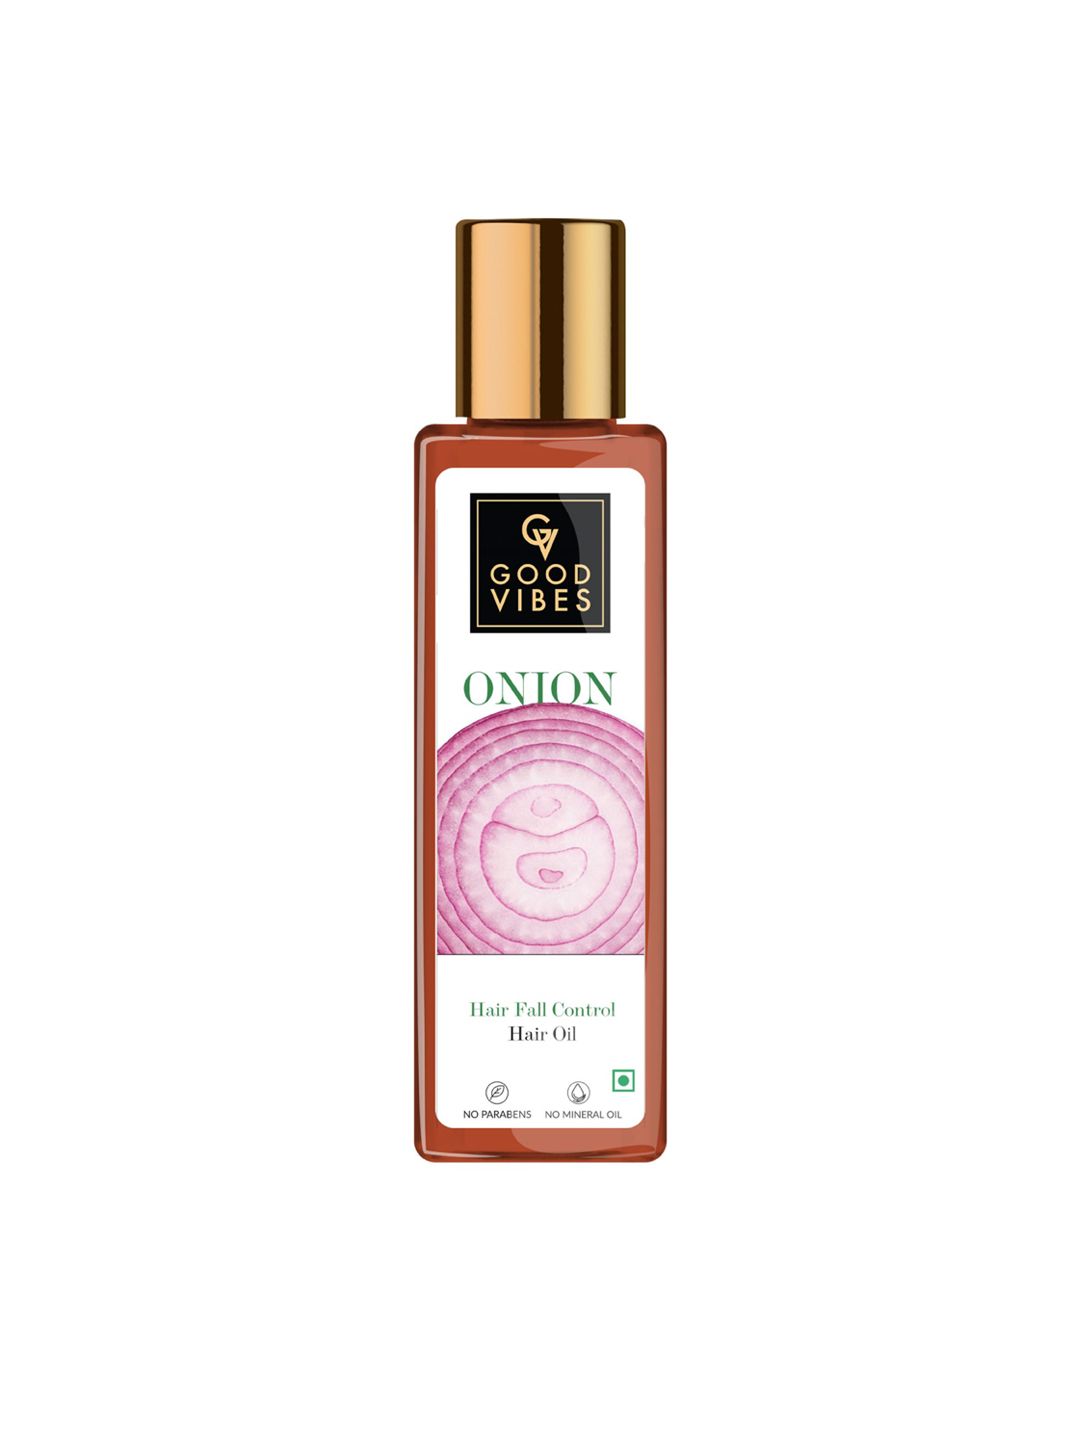 Good Vibes Onion Hairfall Control Hair Oil - 200 ml Price in India